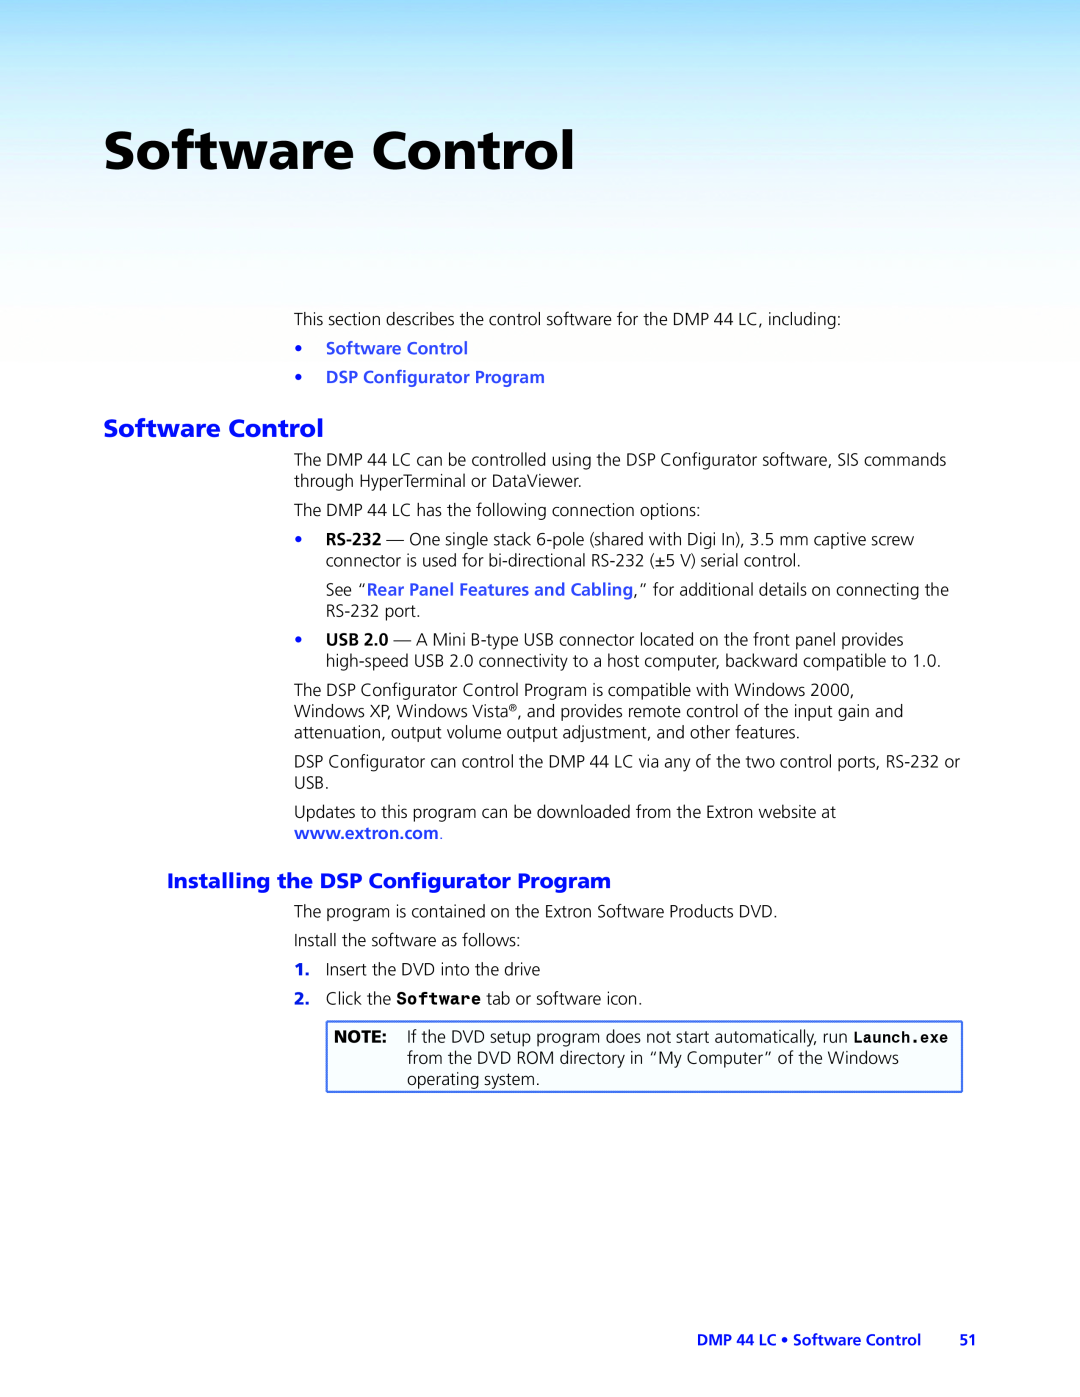 Extron electronic DMP 44 LC manual Software Control, Installing the DSP Configurator Program 